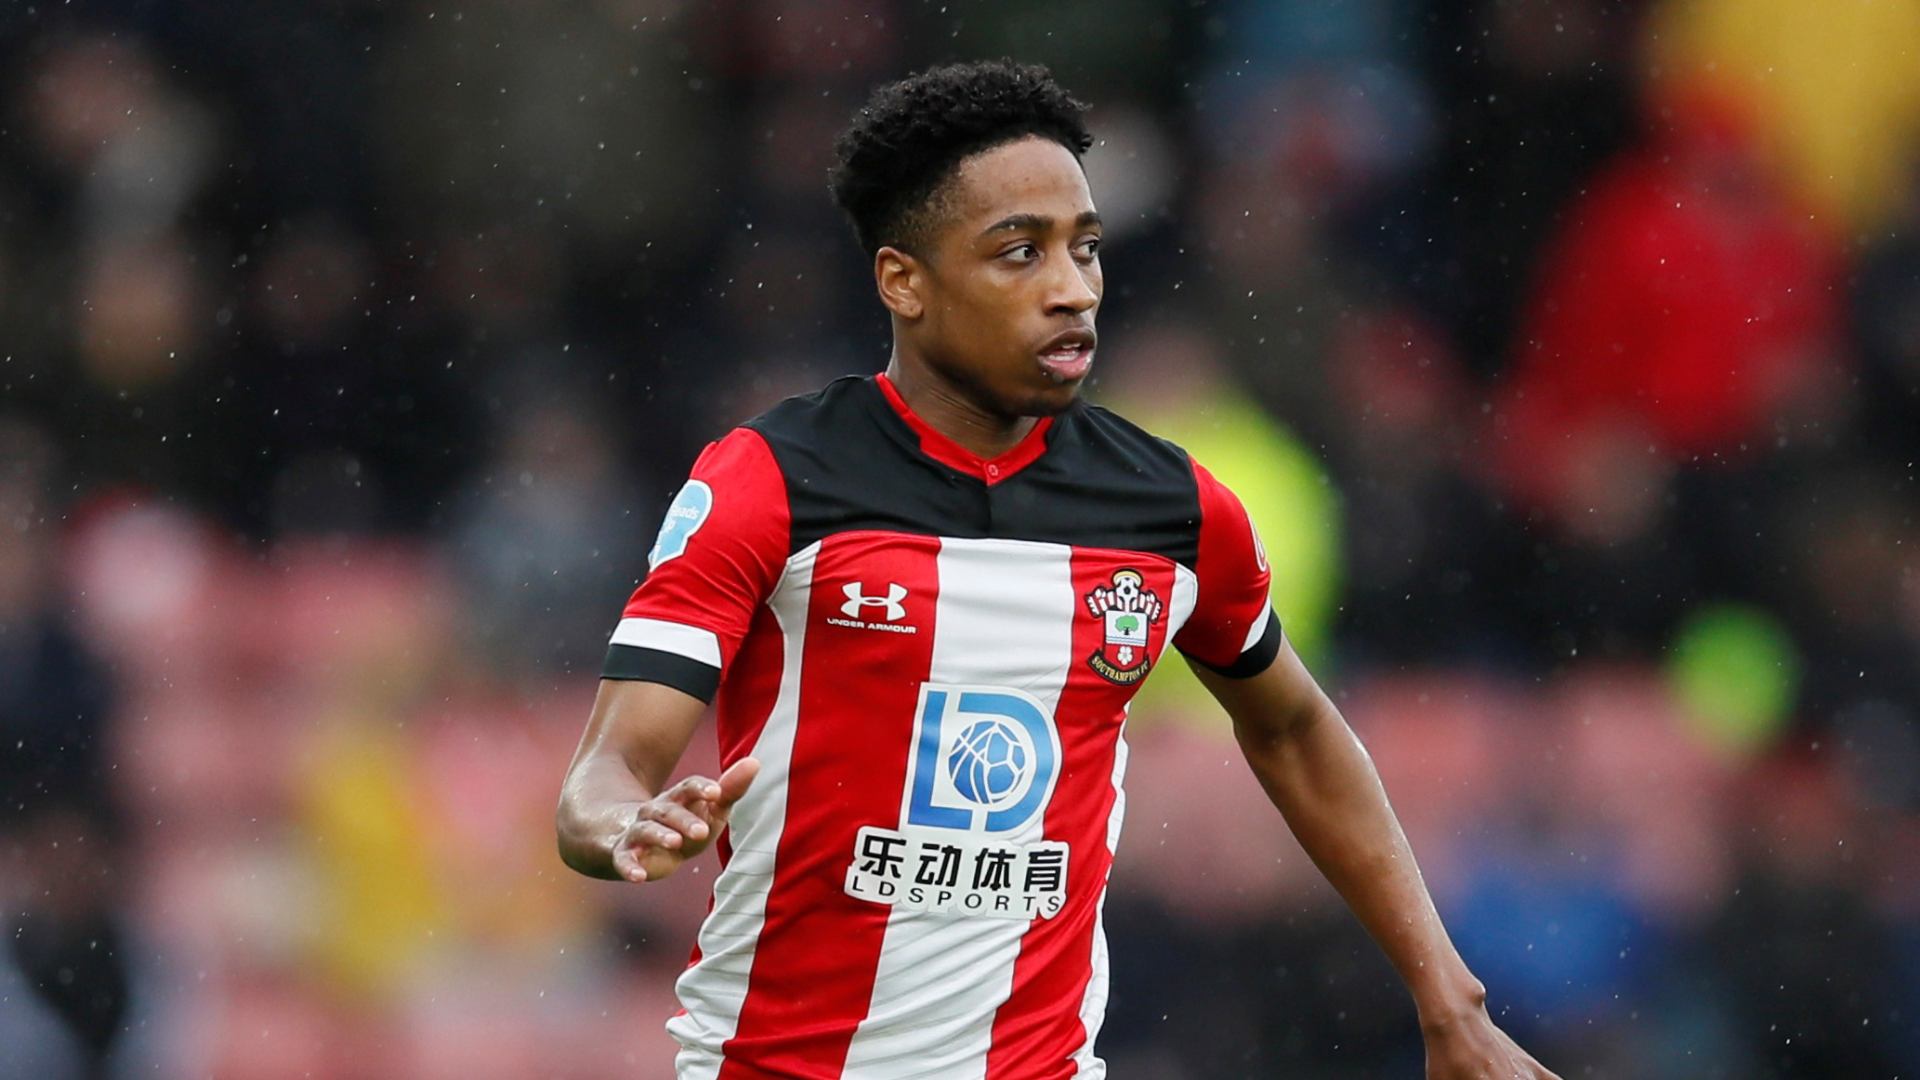 Kyle Walker-Peters for Southampton